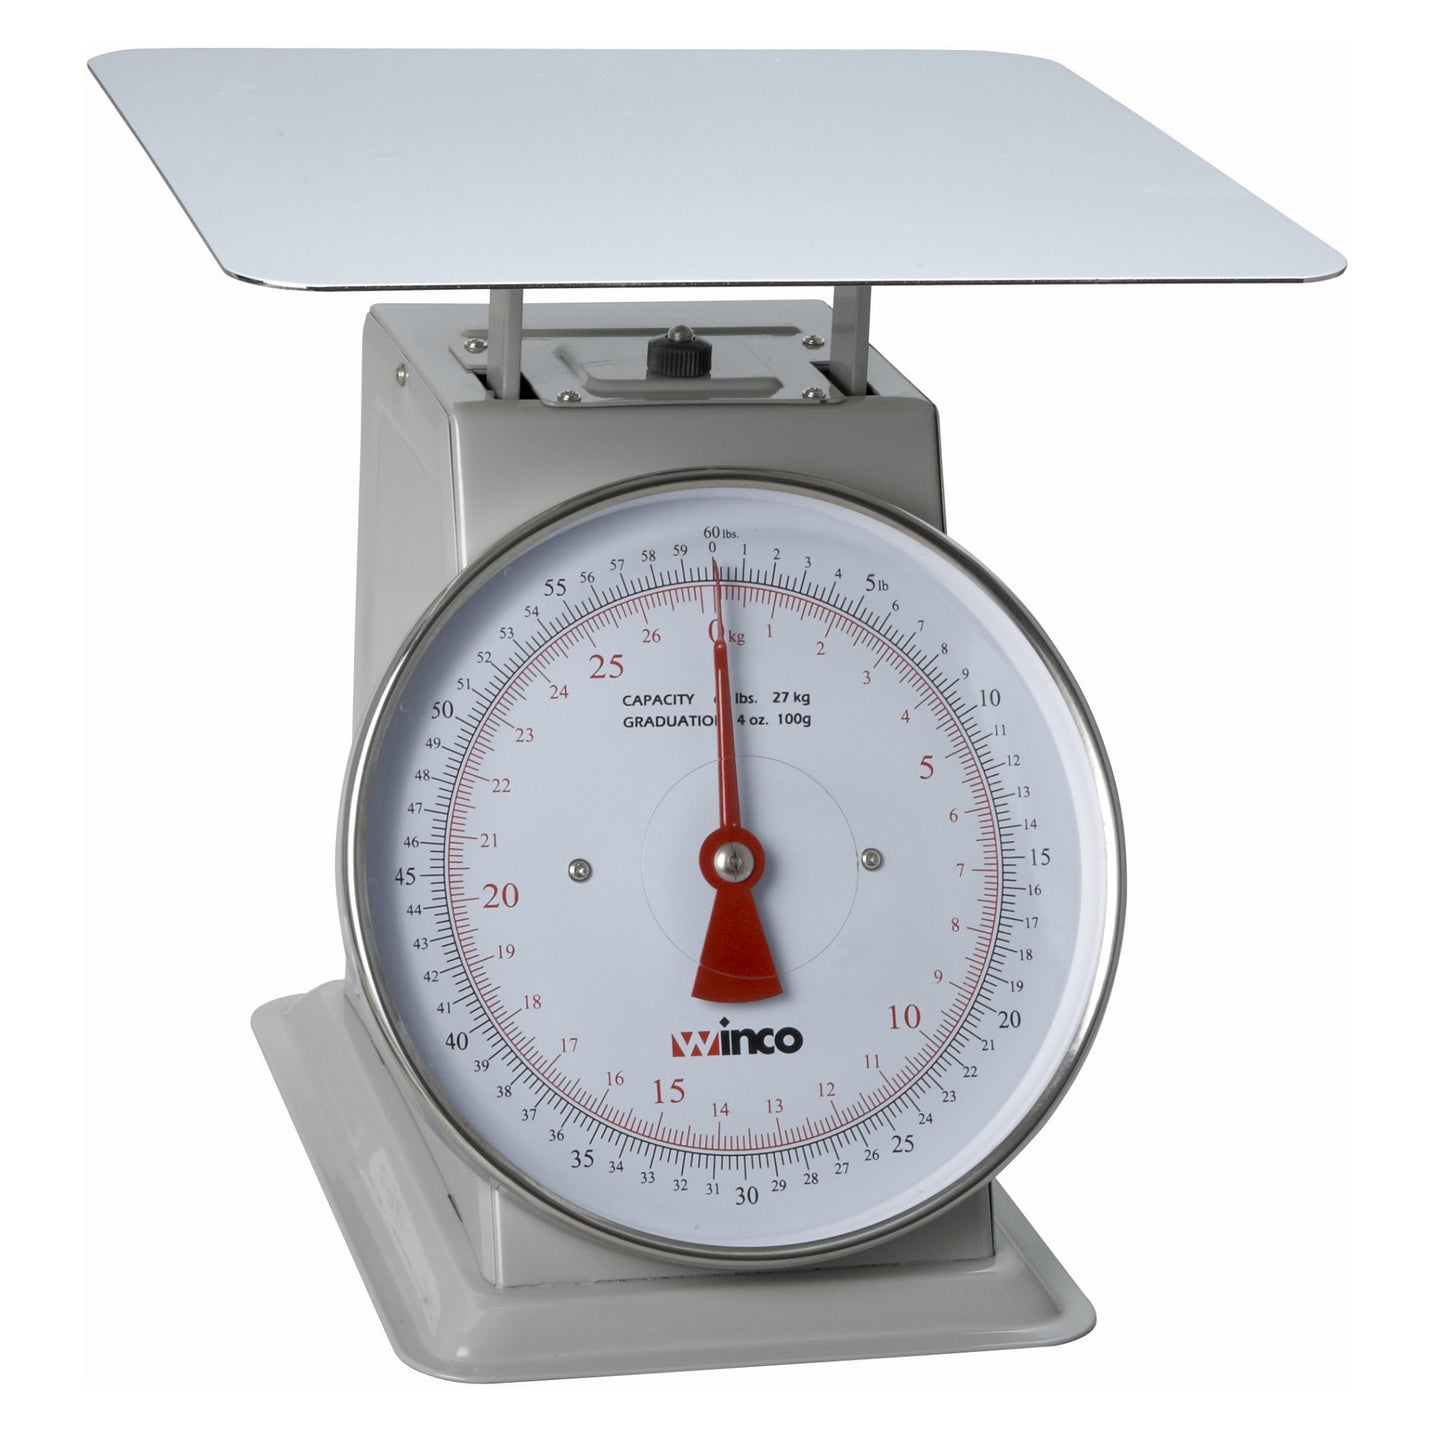 SCAL-960 - Receiving Scale - 60 lbs